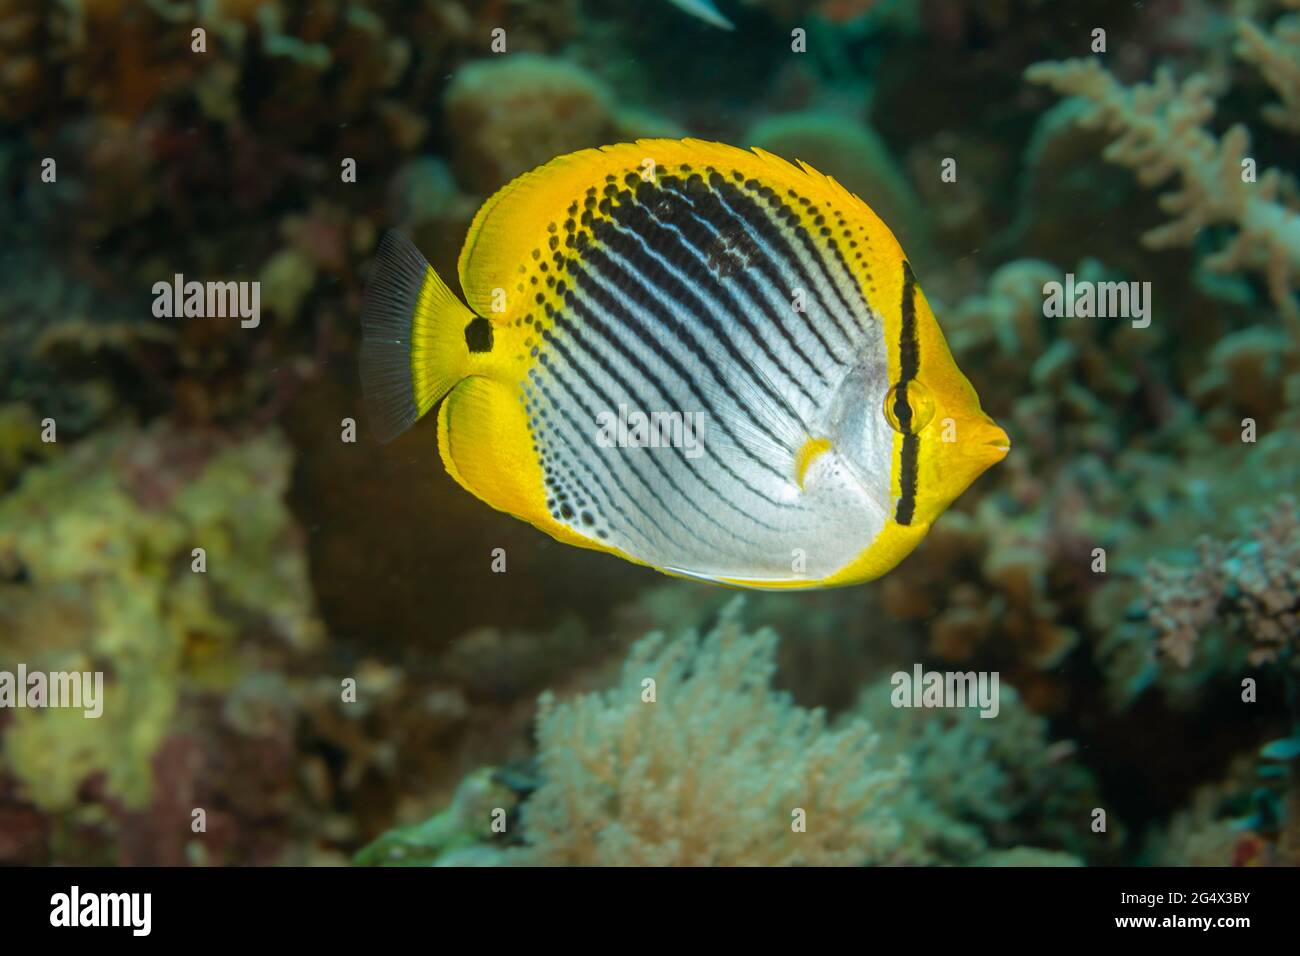 The spot-tail butterflyfish, Chaetodon ocellicaudus, is usually found in coral rich areas, Philippines. Stock Photo